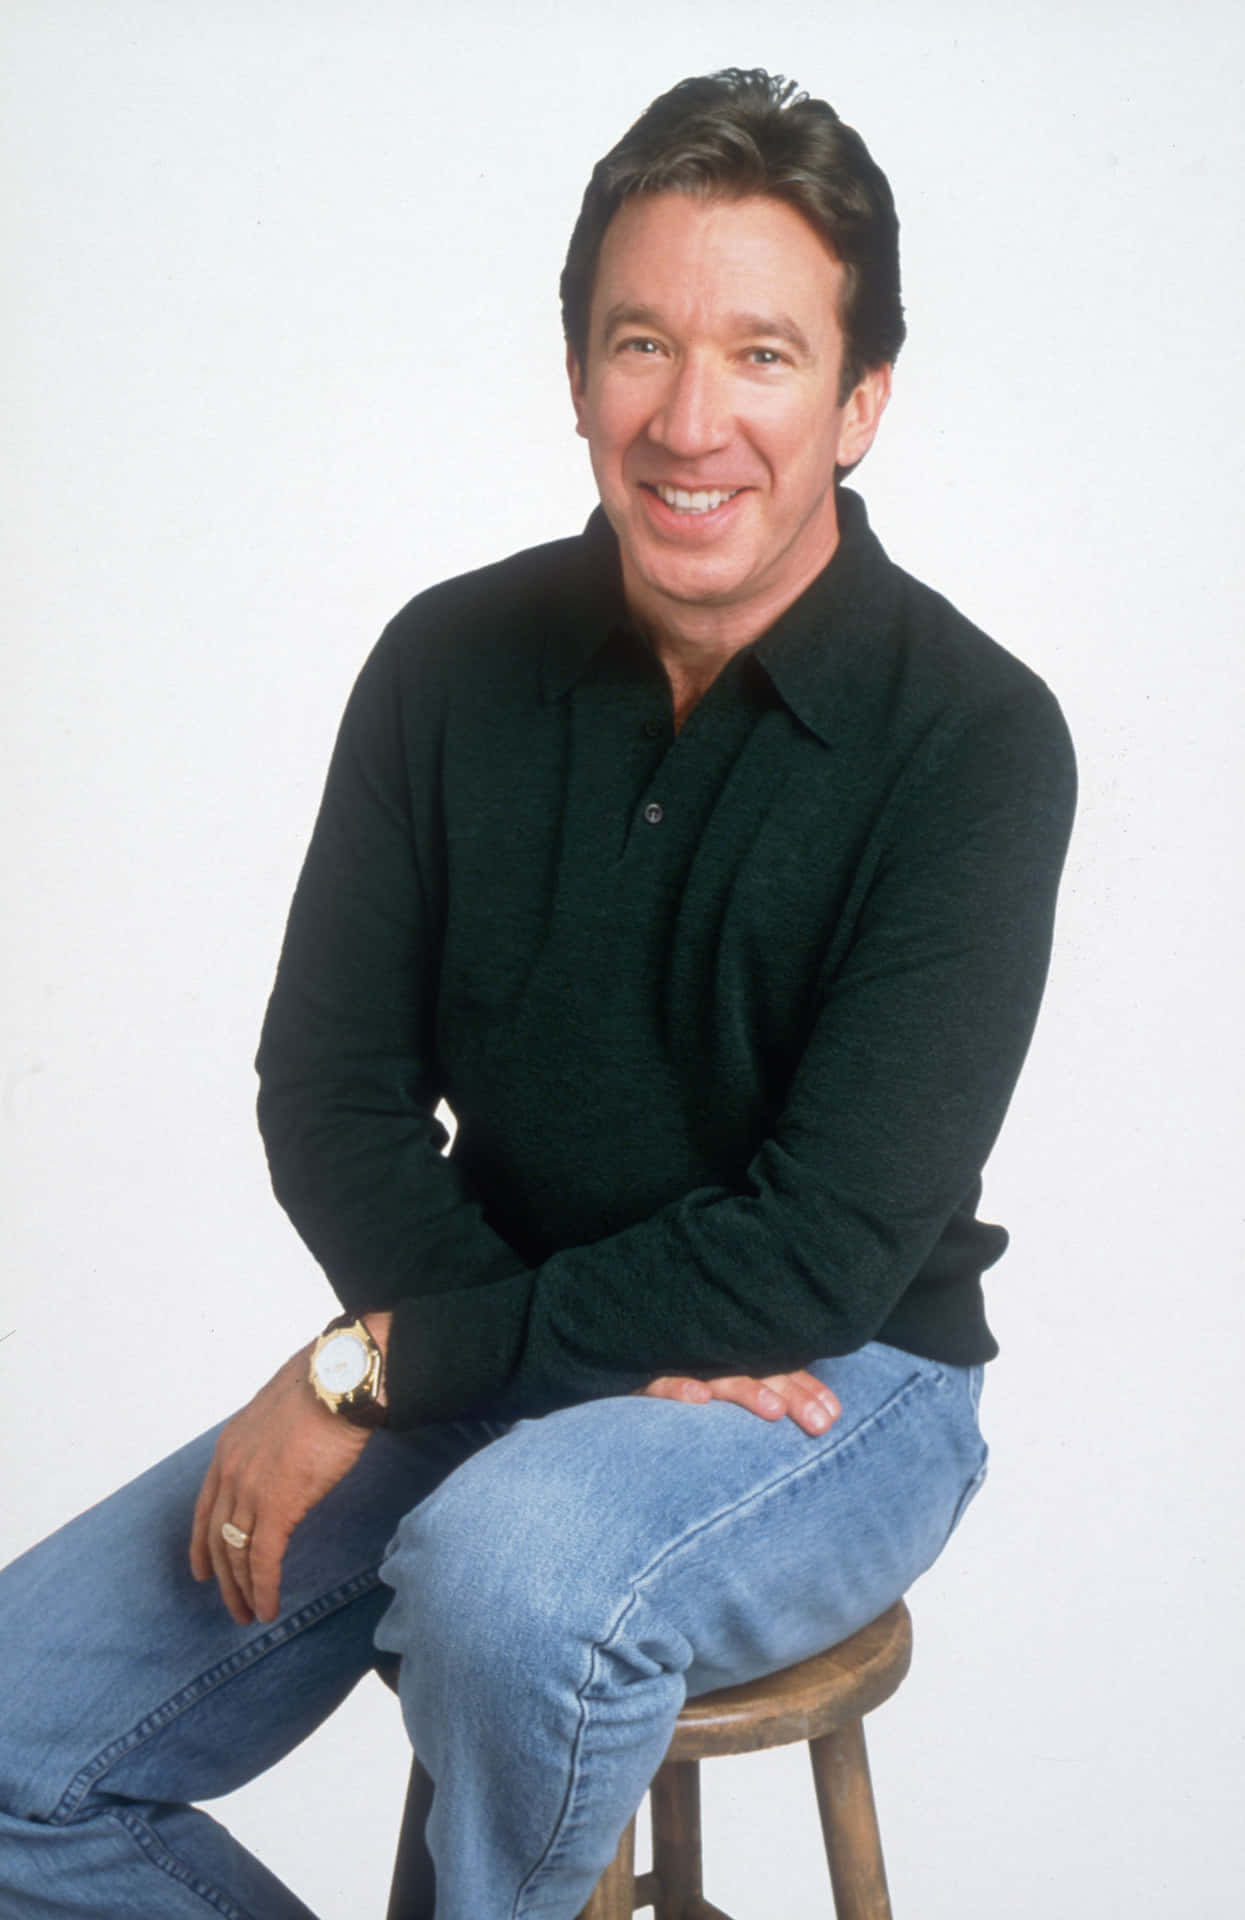 Caption: A Gracious Smile from the Legendary Tim Allen Wallpaper